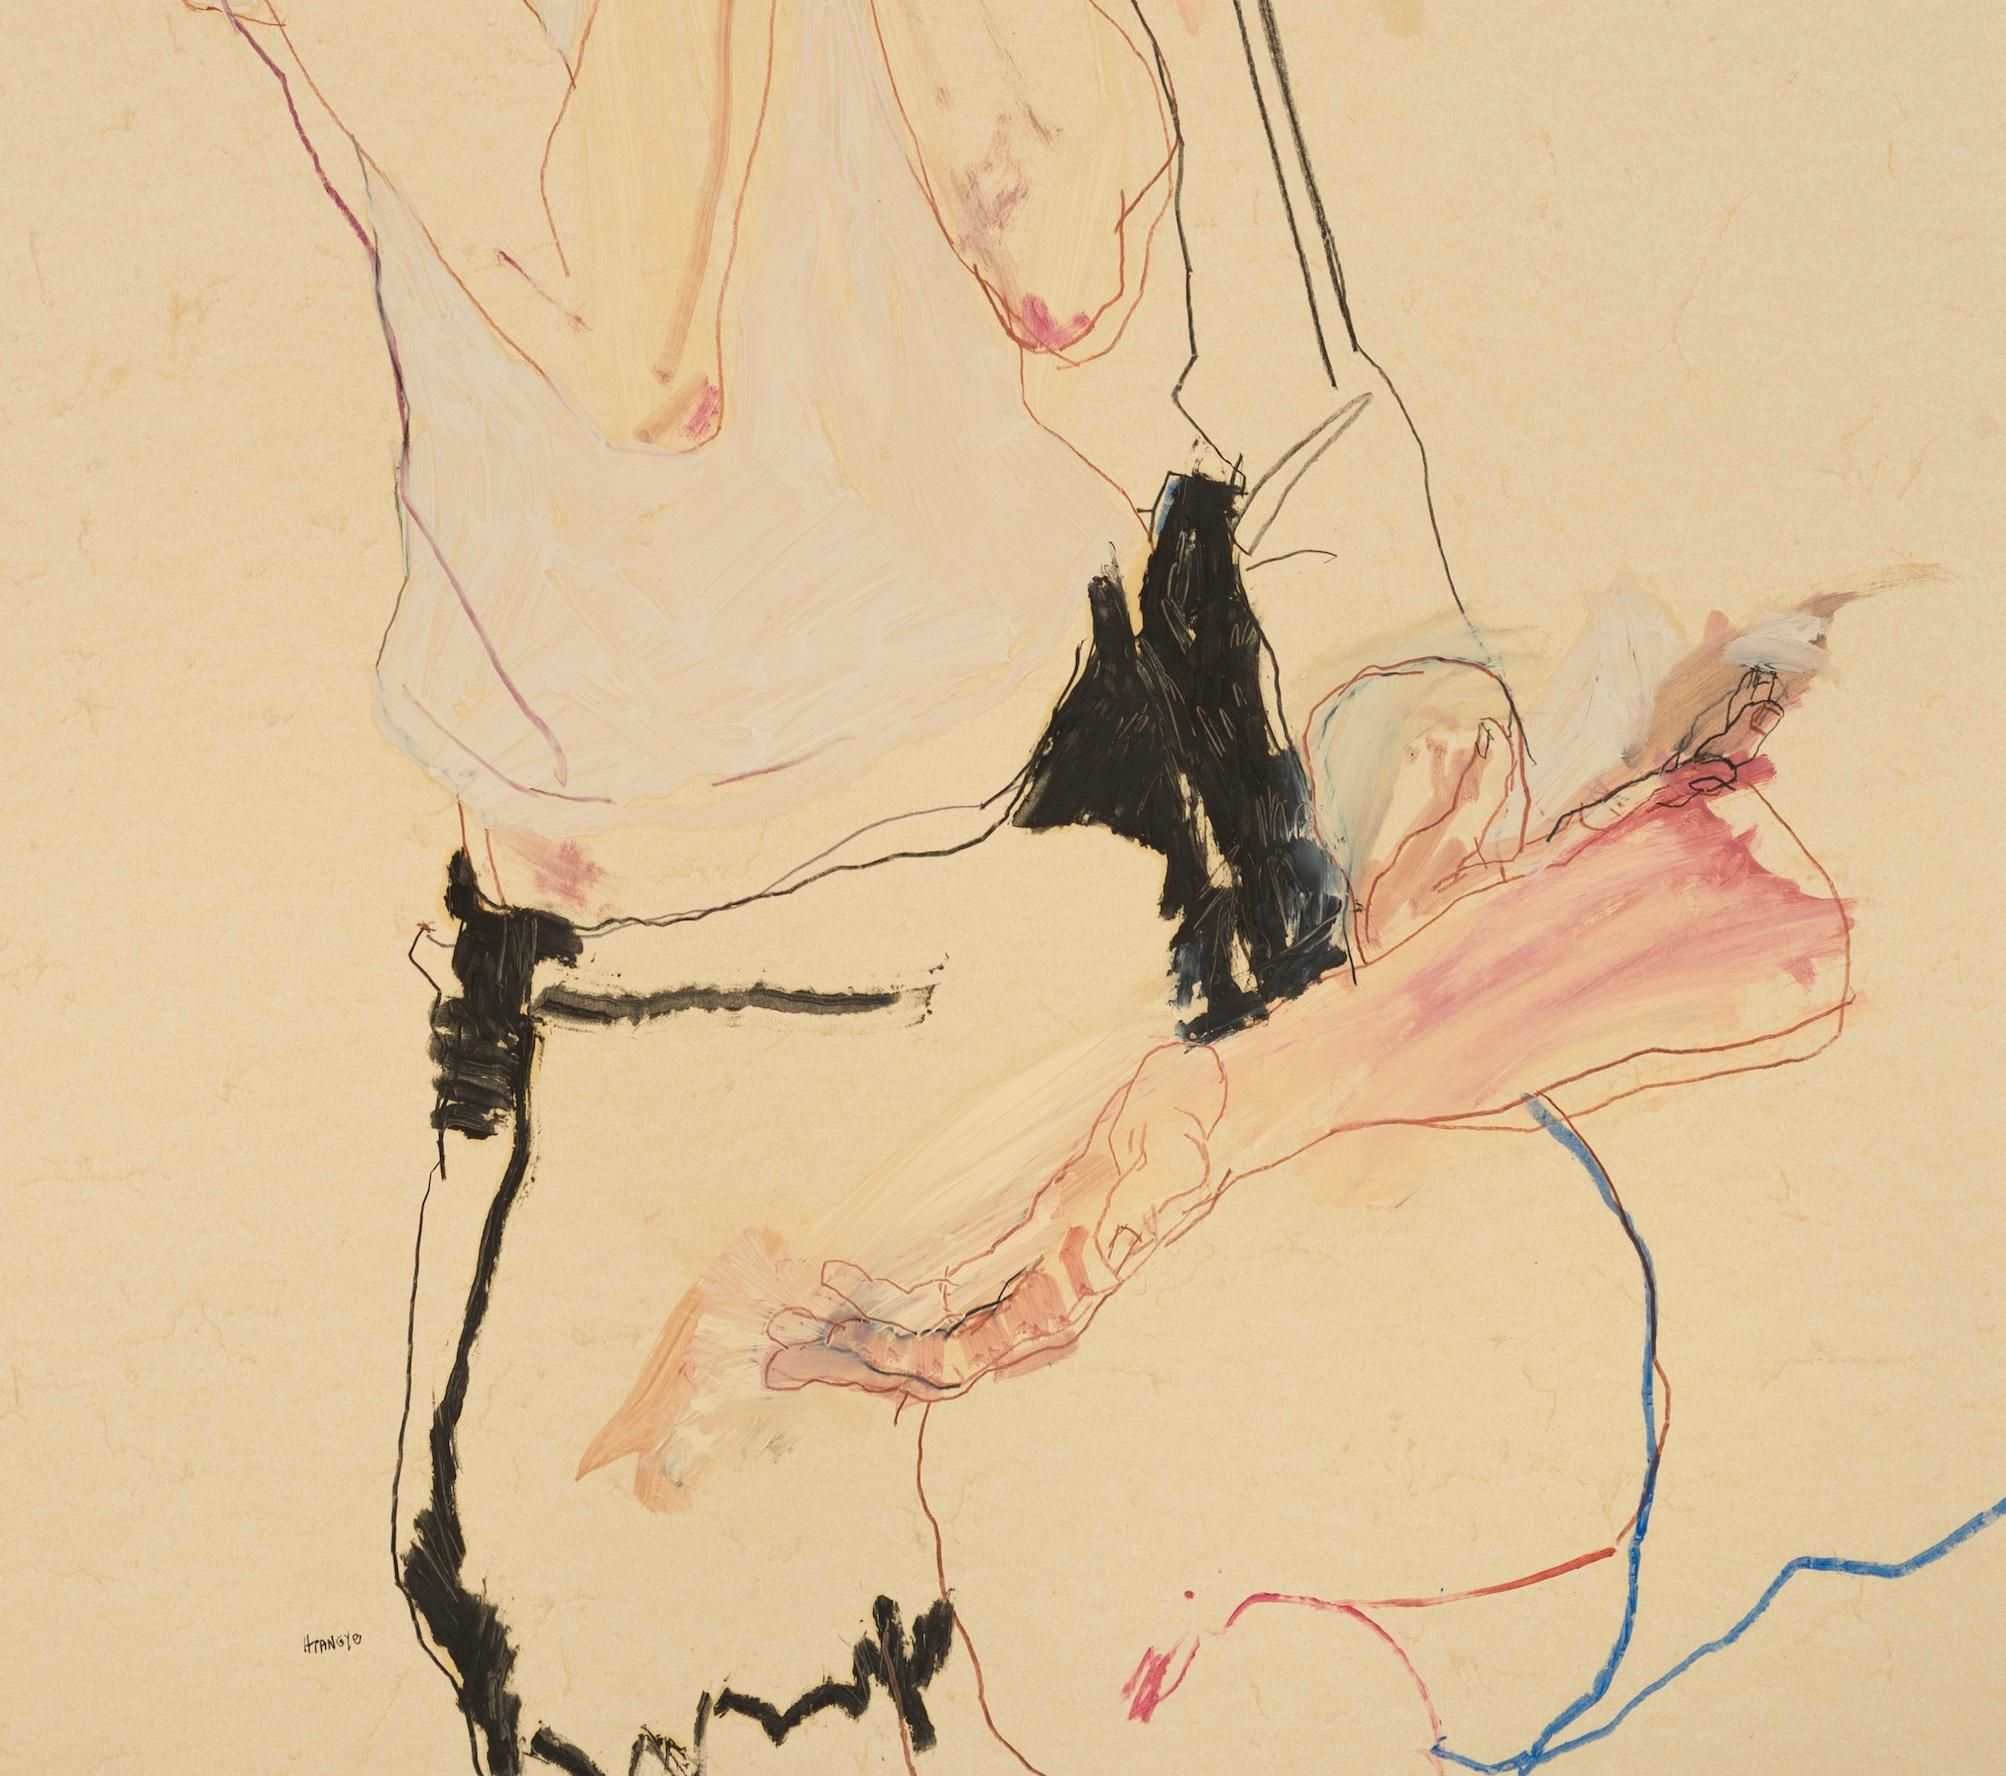 Sarah & Asad (Hands to Face), Mixed media on Pergamenata parchment - Contemporary Painting by Howard Tangye